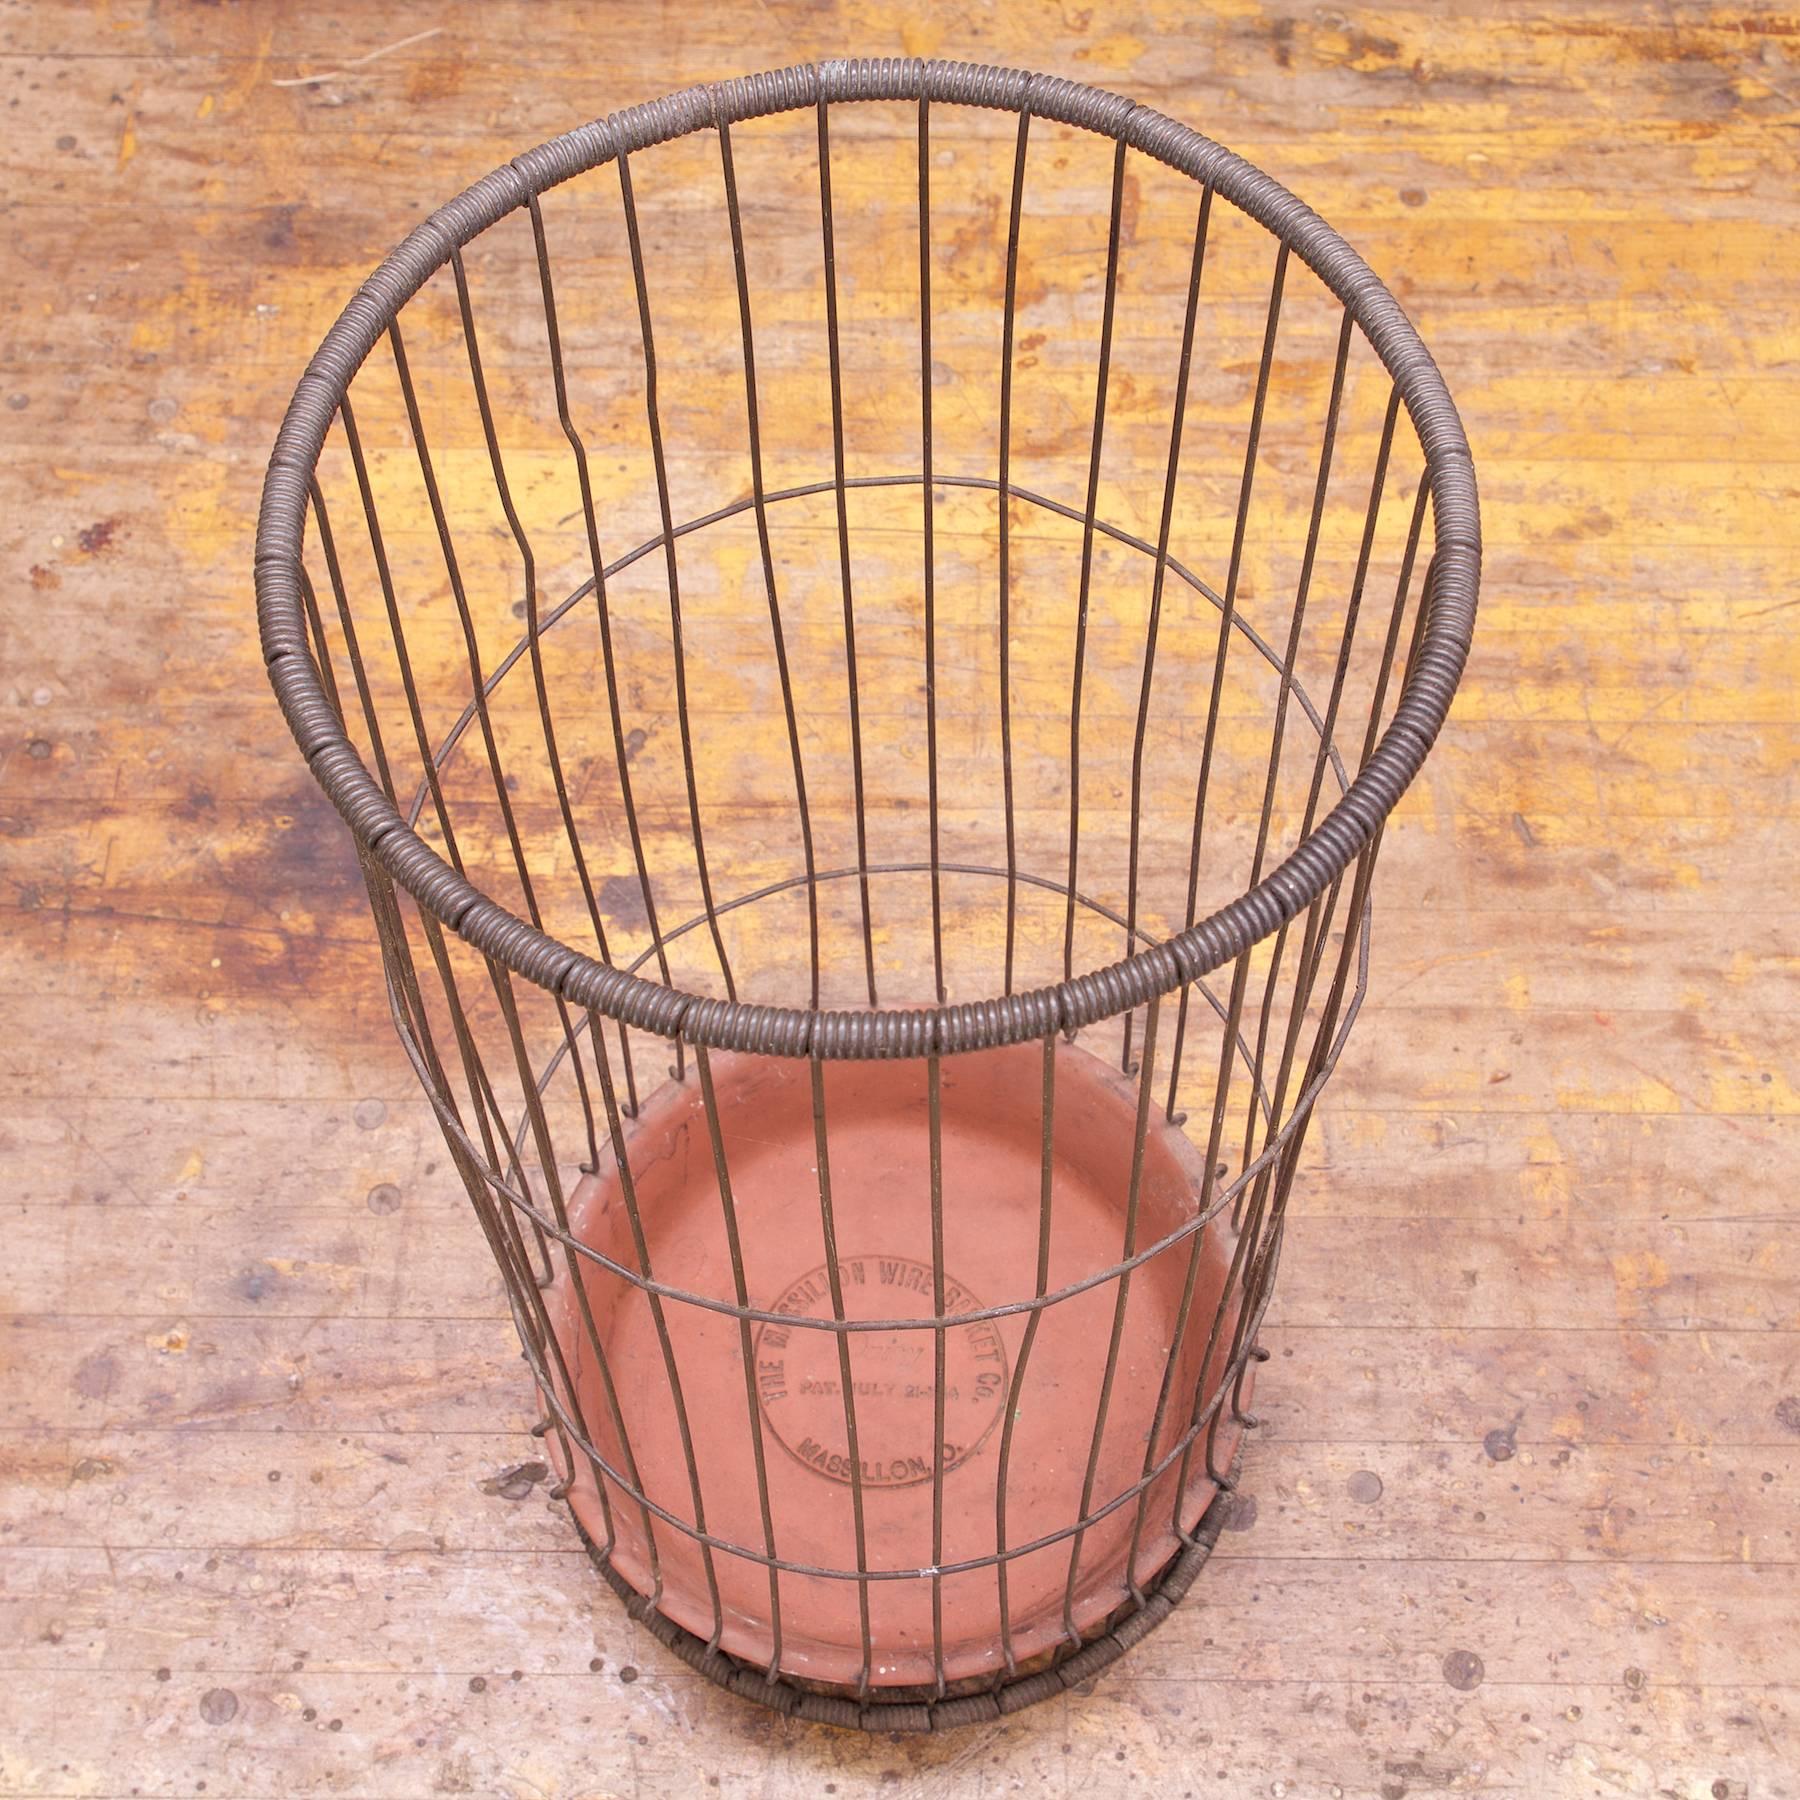 Rare tall wire basket with clay/pottery dish, marked with manufacturers markings and patent date/nos.